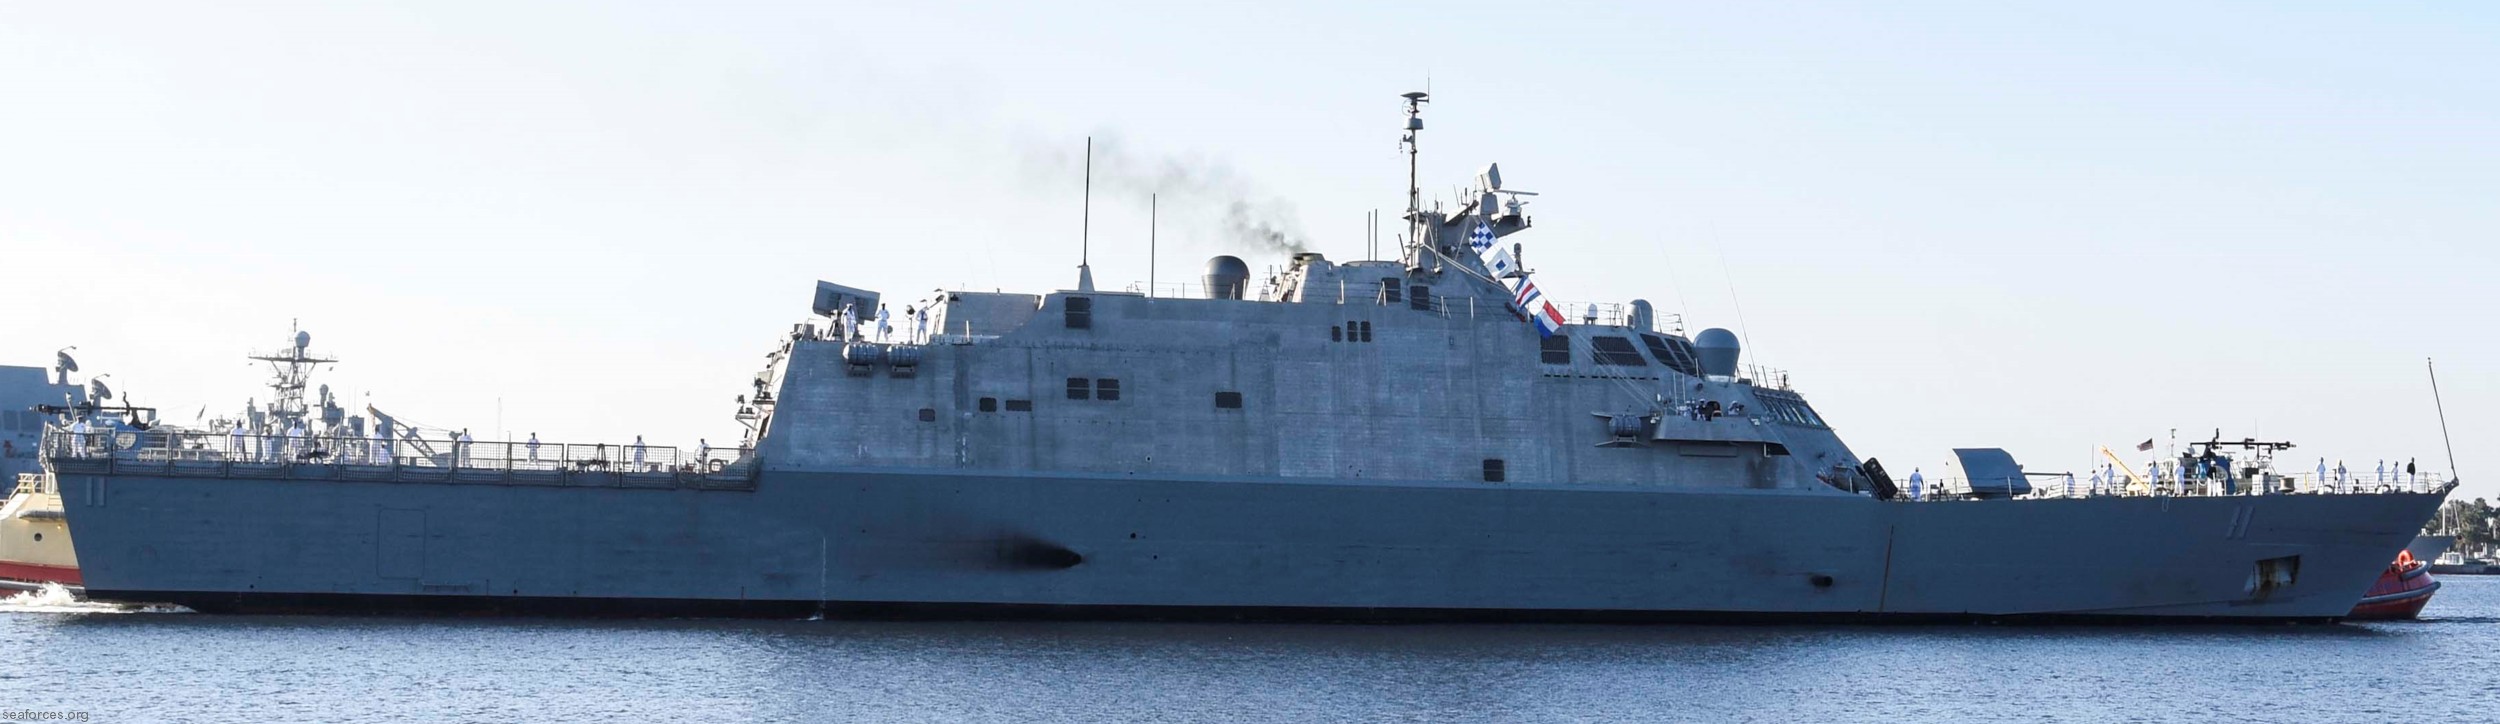 lcs-11 uss sioux city freedom class littoral combat ship us navy 13